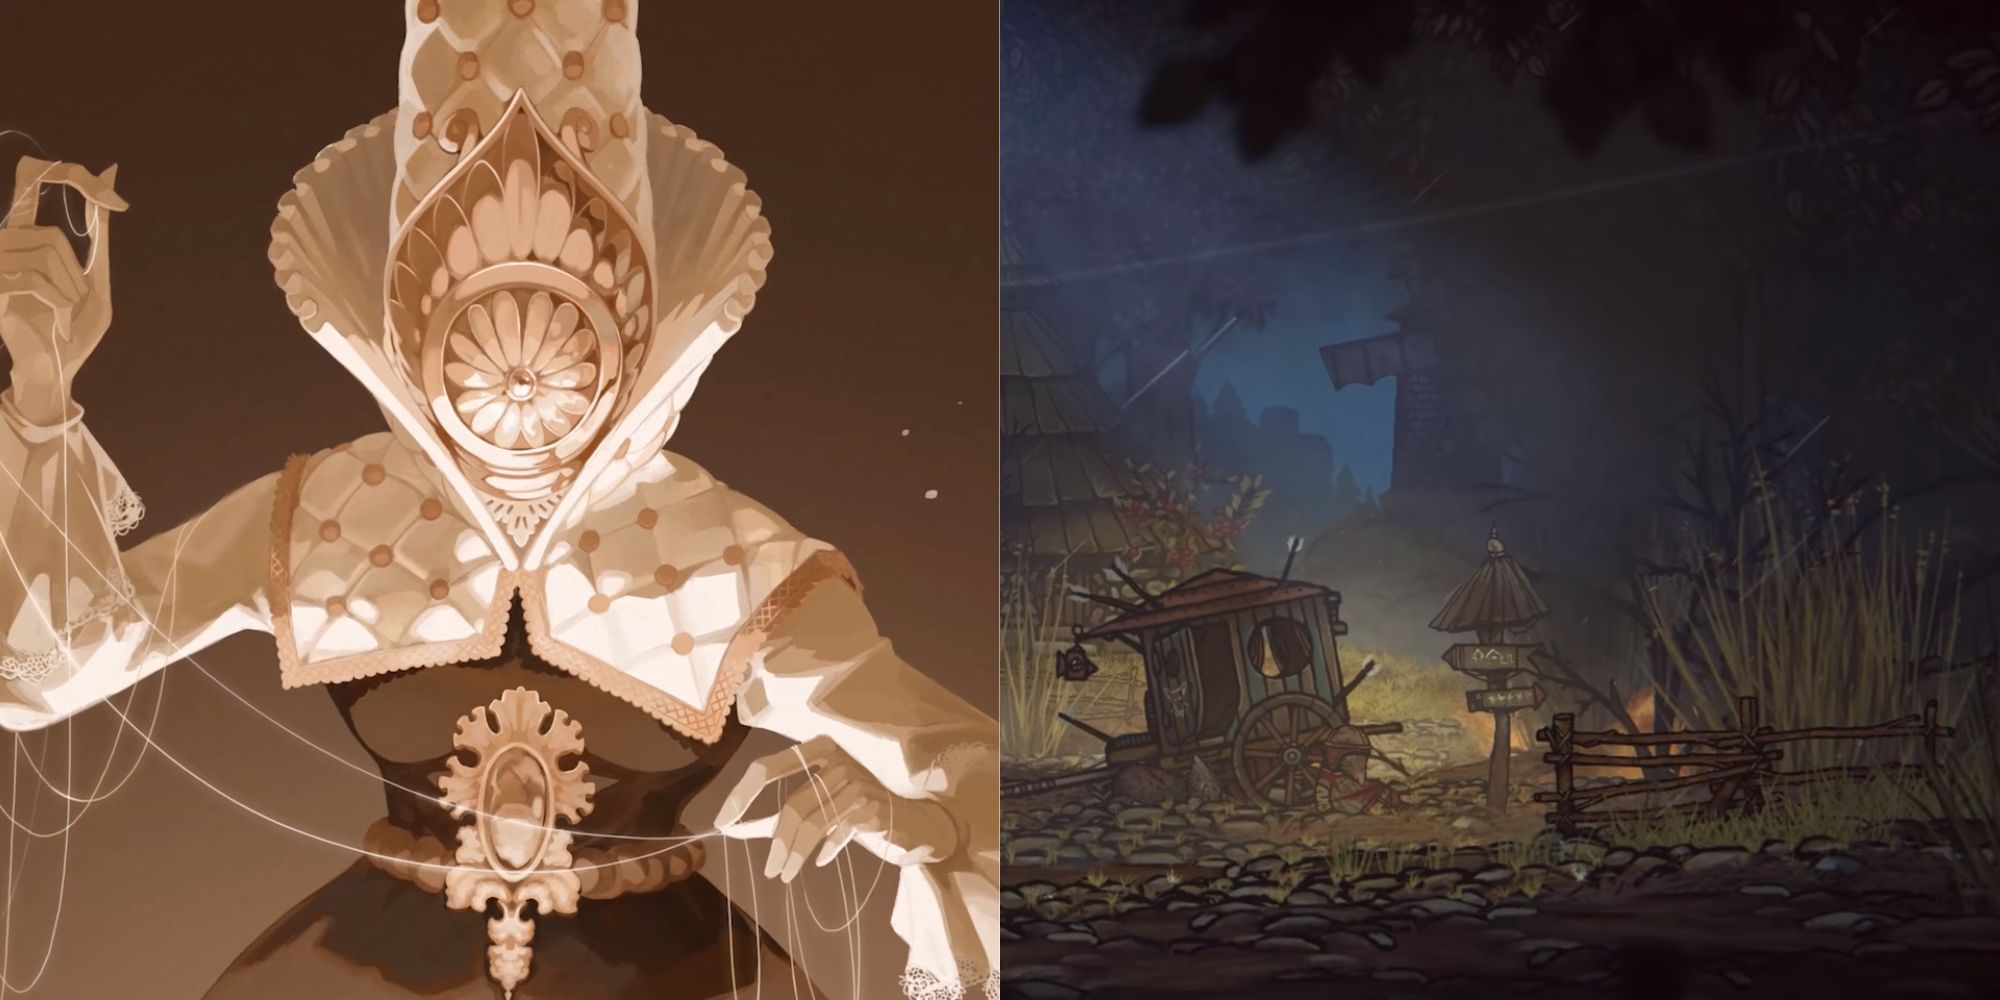 A collage showing a character from Blasphemous 2 on the left and one location of Tales of Iron on the right.